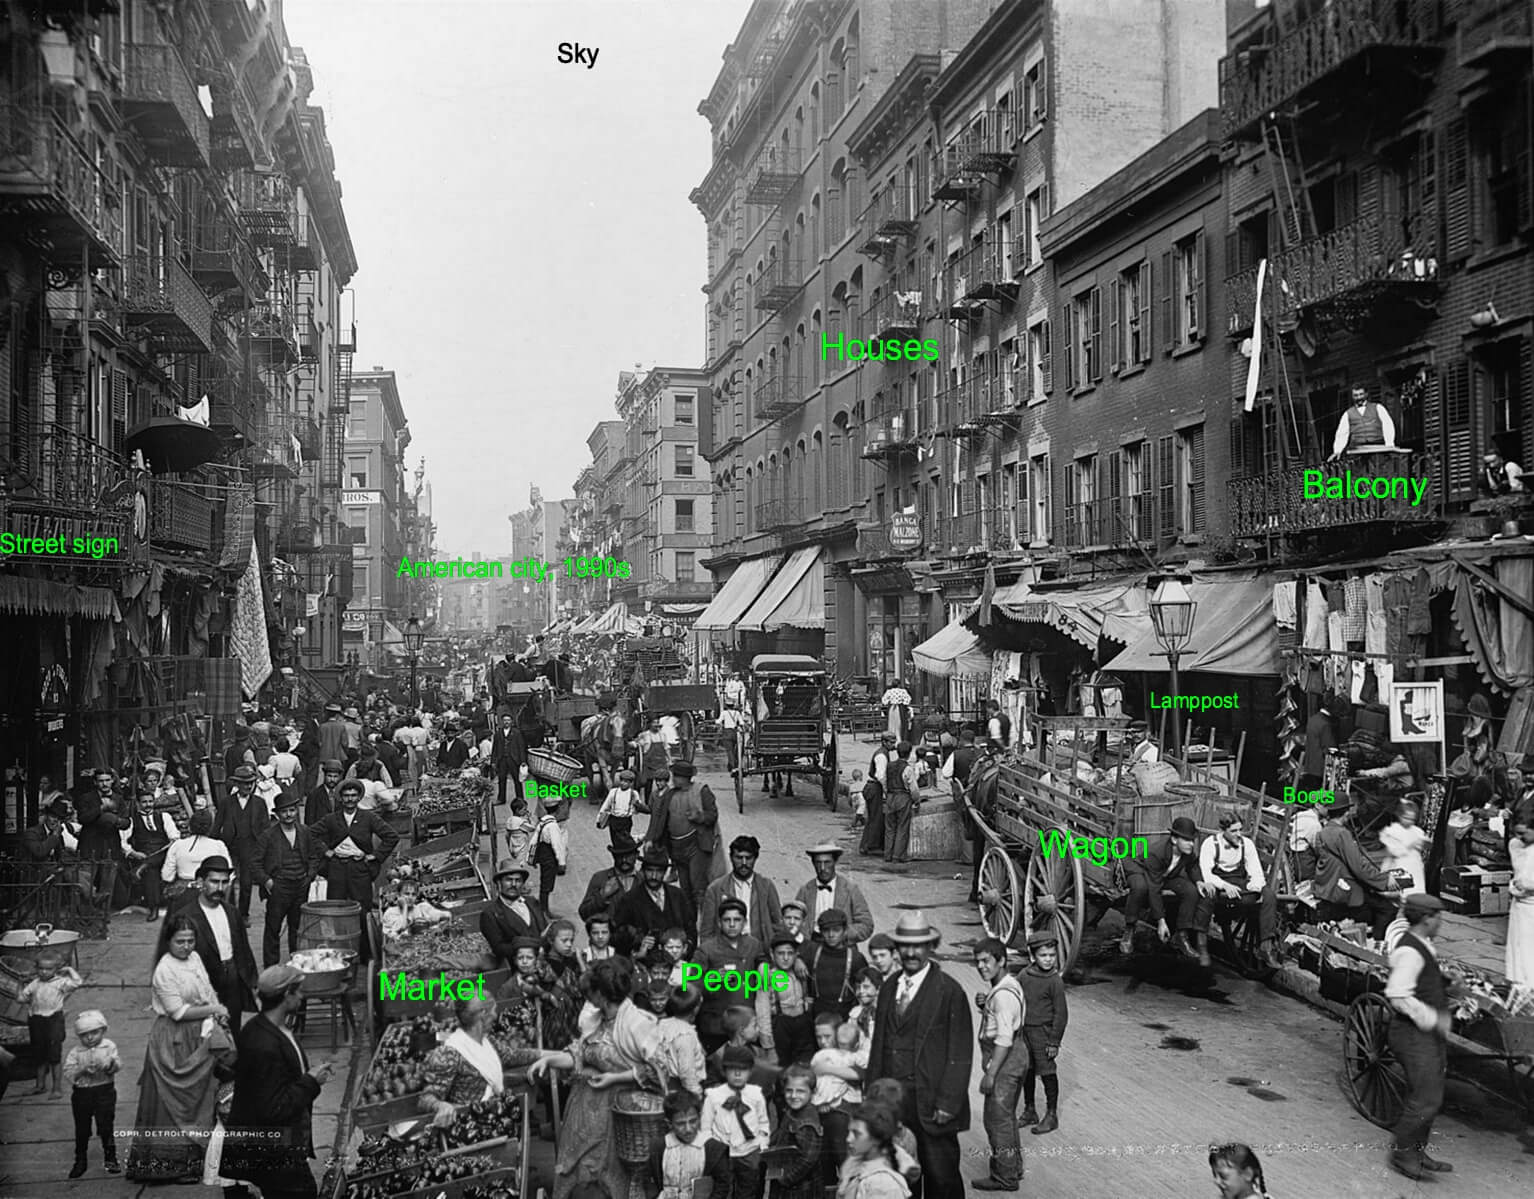 a crowded street in 1900s New York, black and white photo, with semantic labels written over various objects in the scene